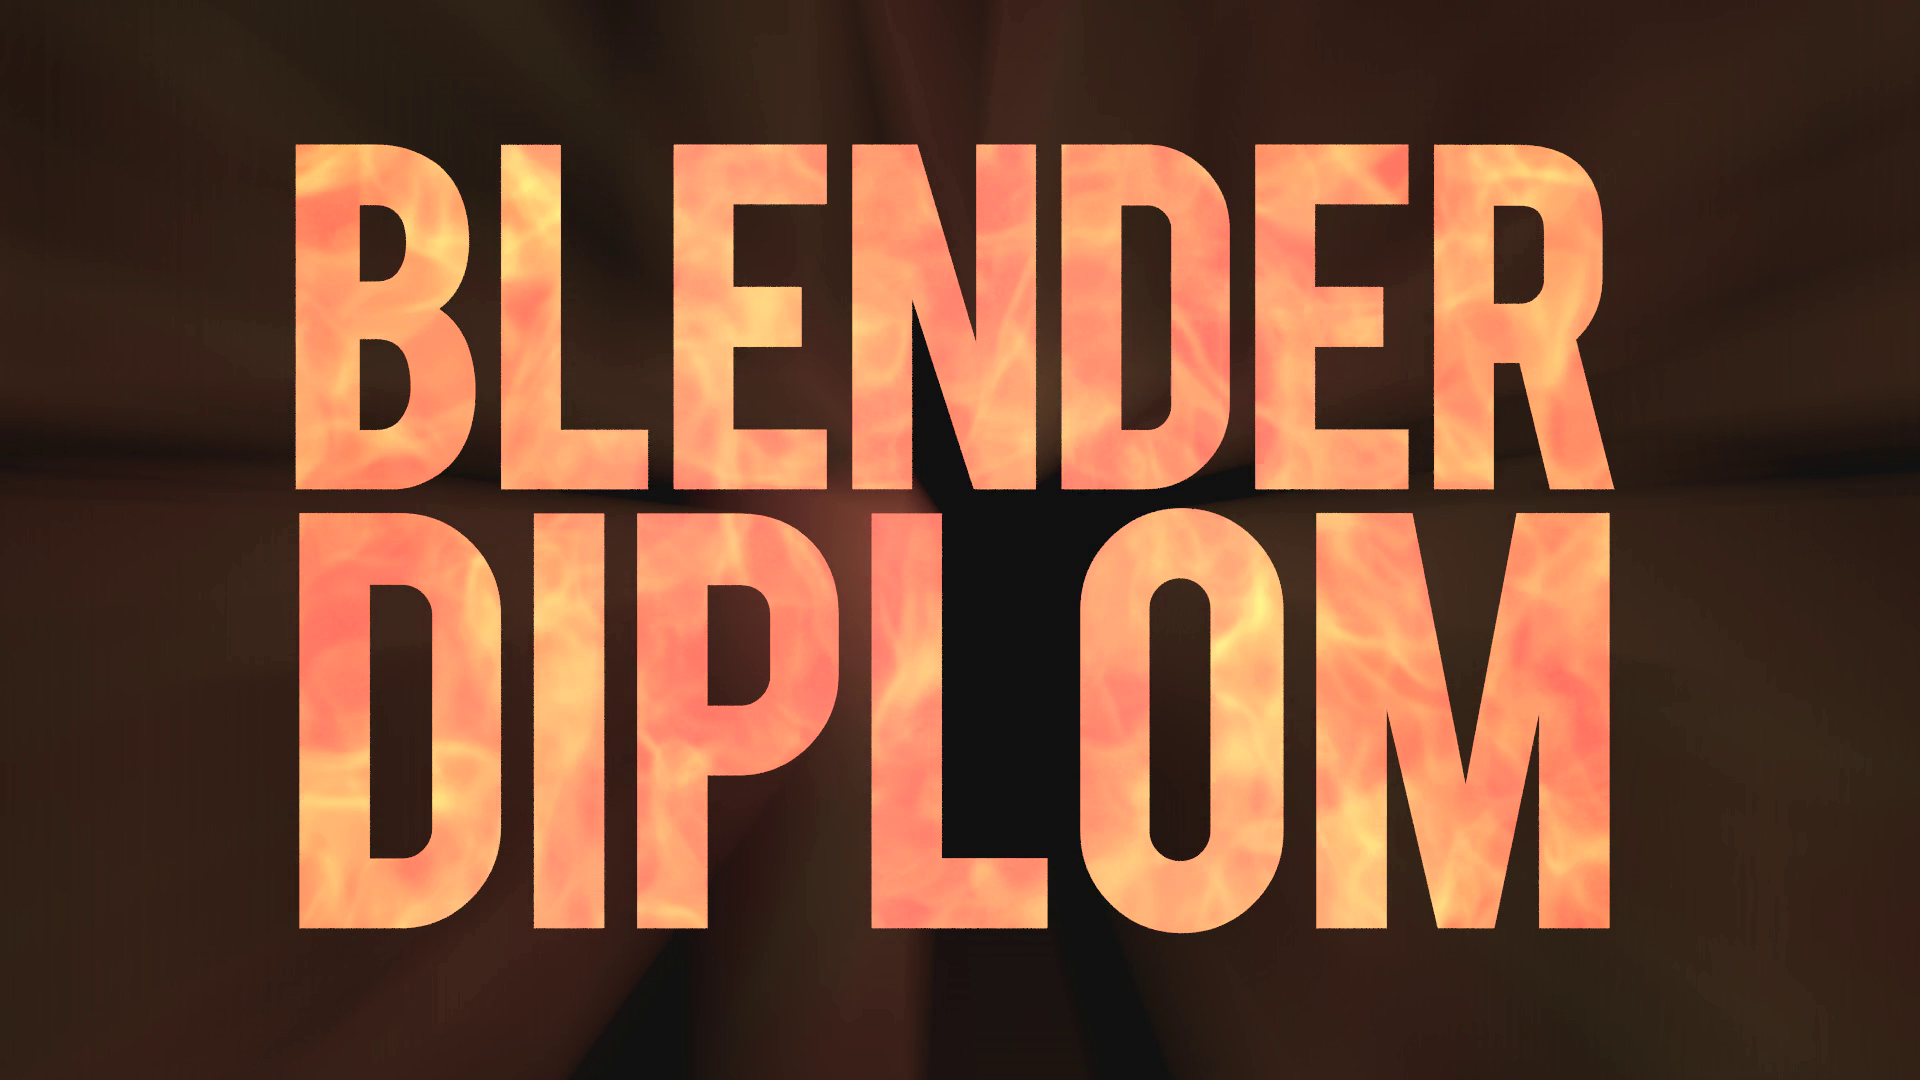 blender fire background stencil cycles